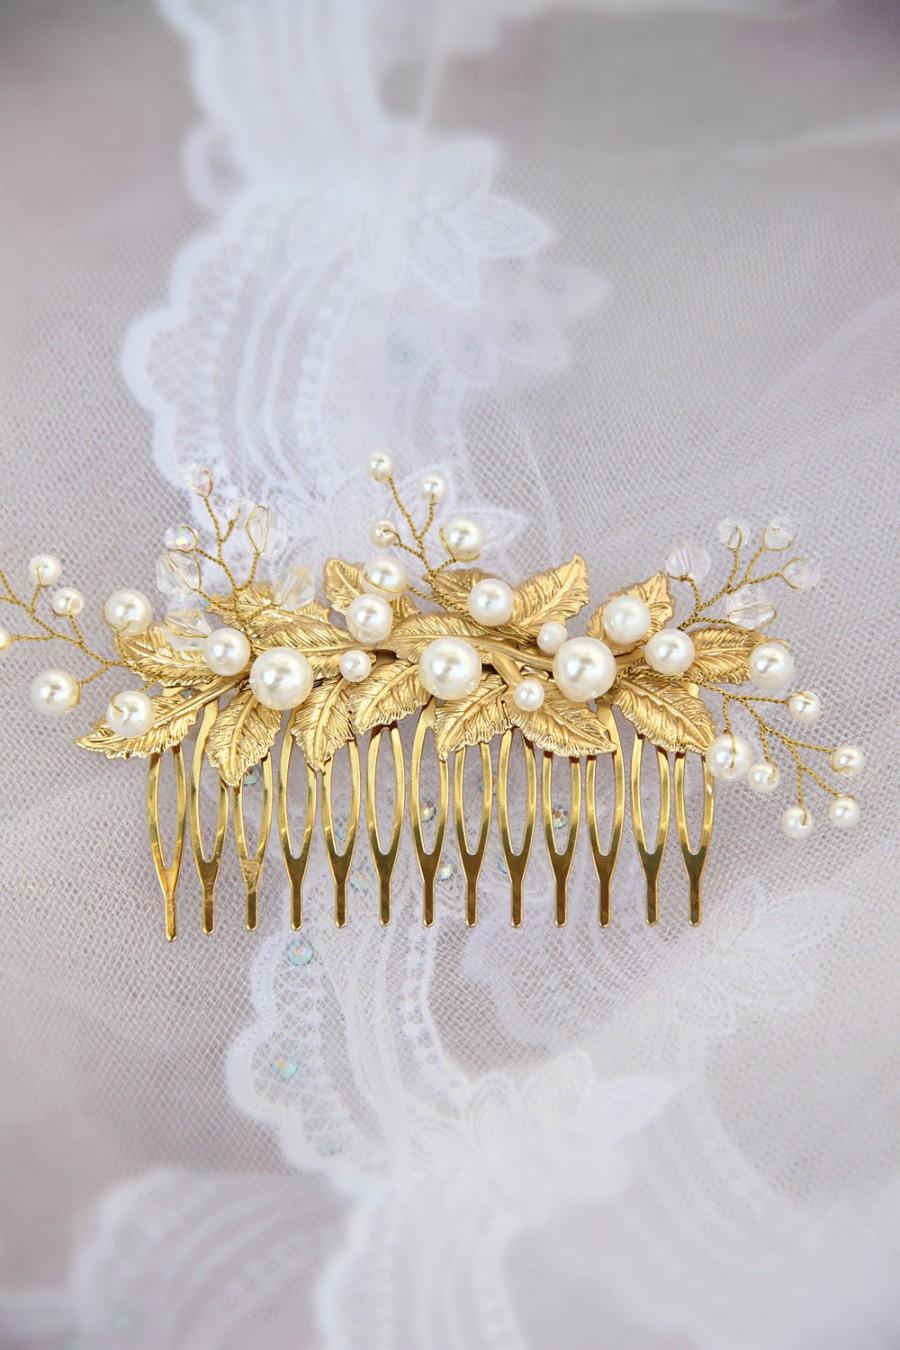 Mariage - gold leaf hair comb, gold hair comb, gold bridal hair comb, pearl hair comb, wedding hair comb, gold wedding hair comb, vintage hair comb